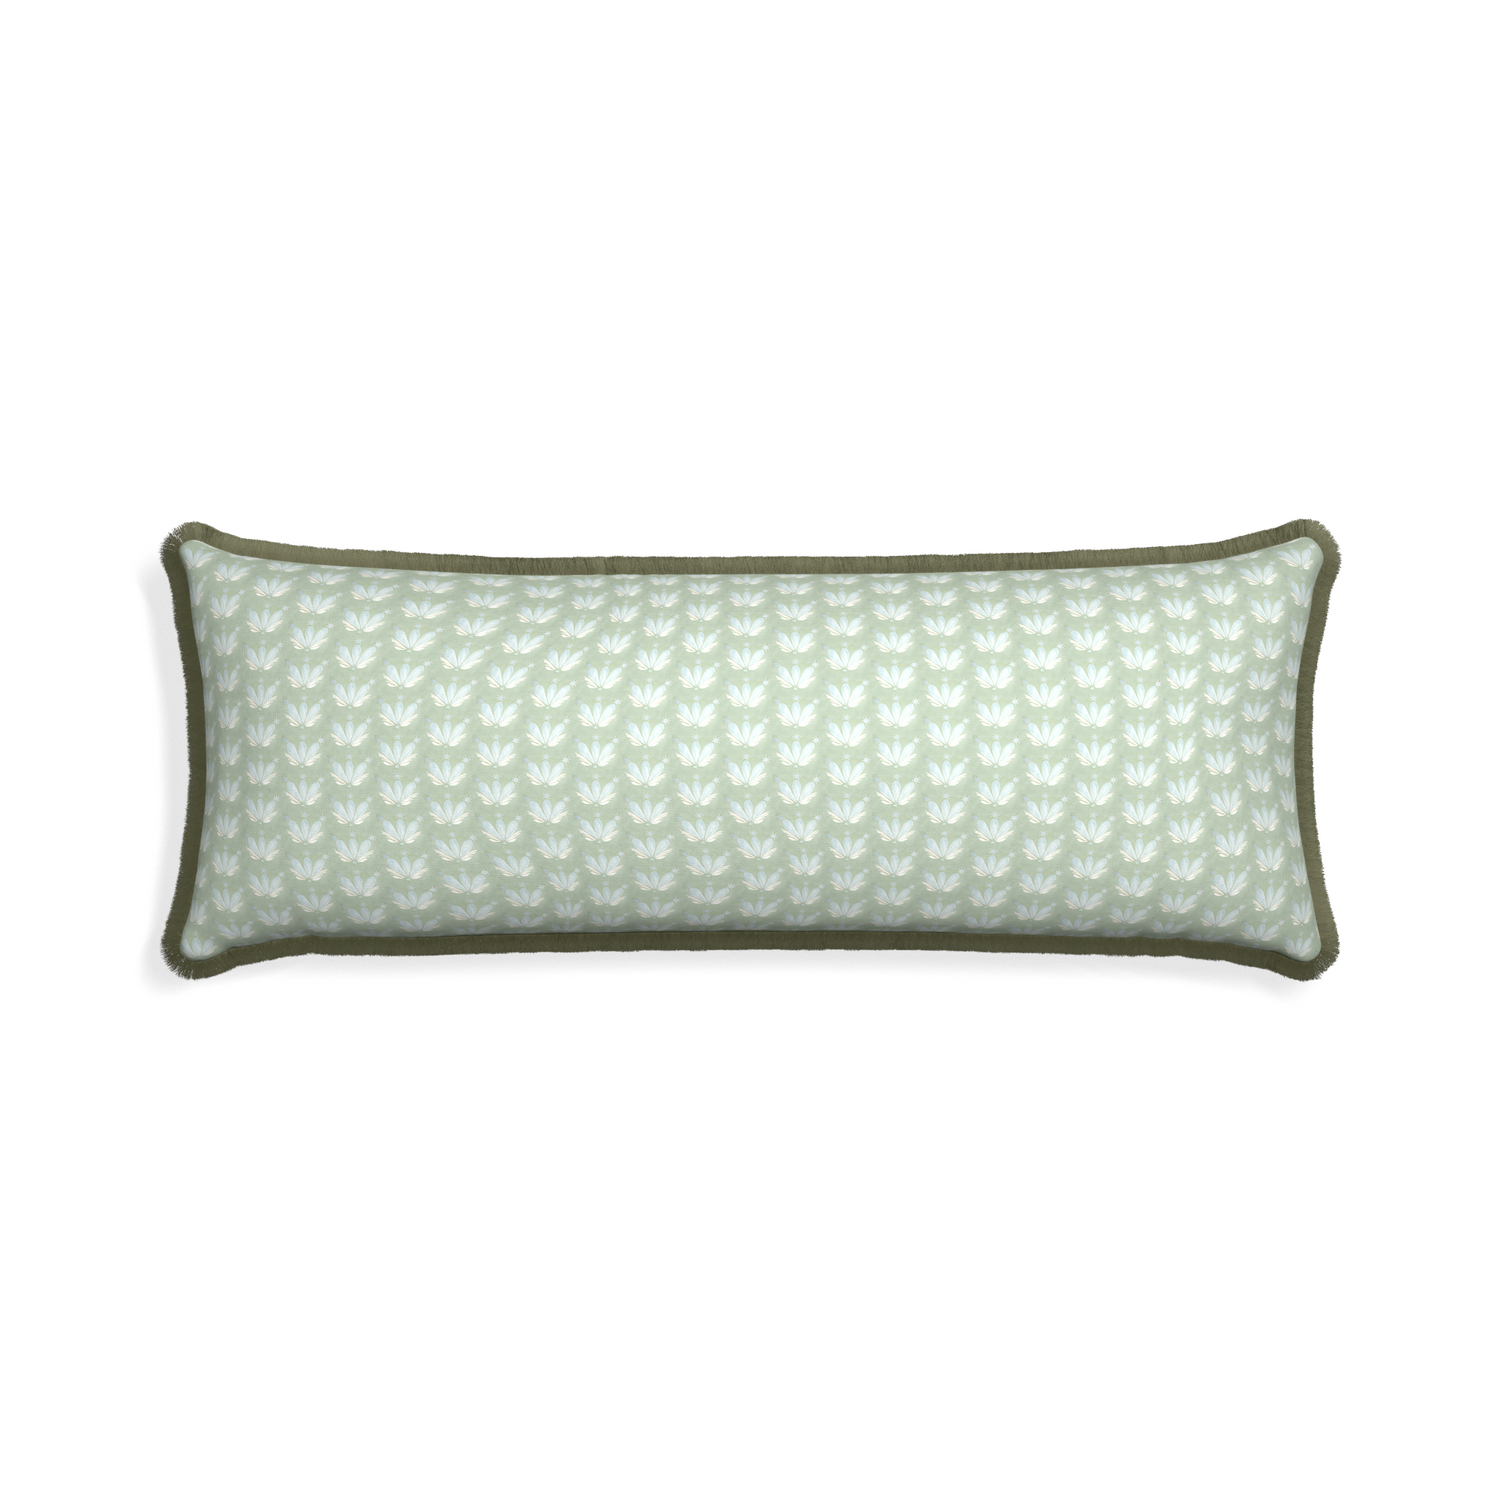 Xl-lumbar serena sea salt custom blue & green floral drop repeatpillow with sage fringe on white background